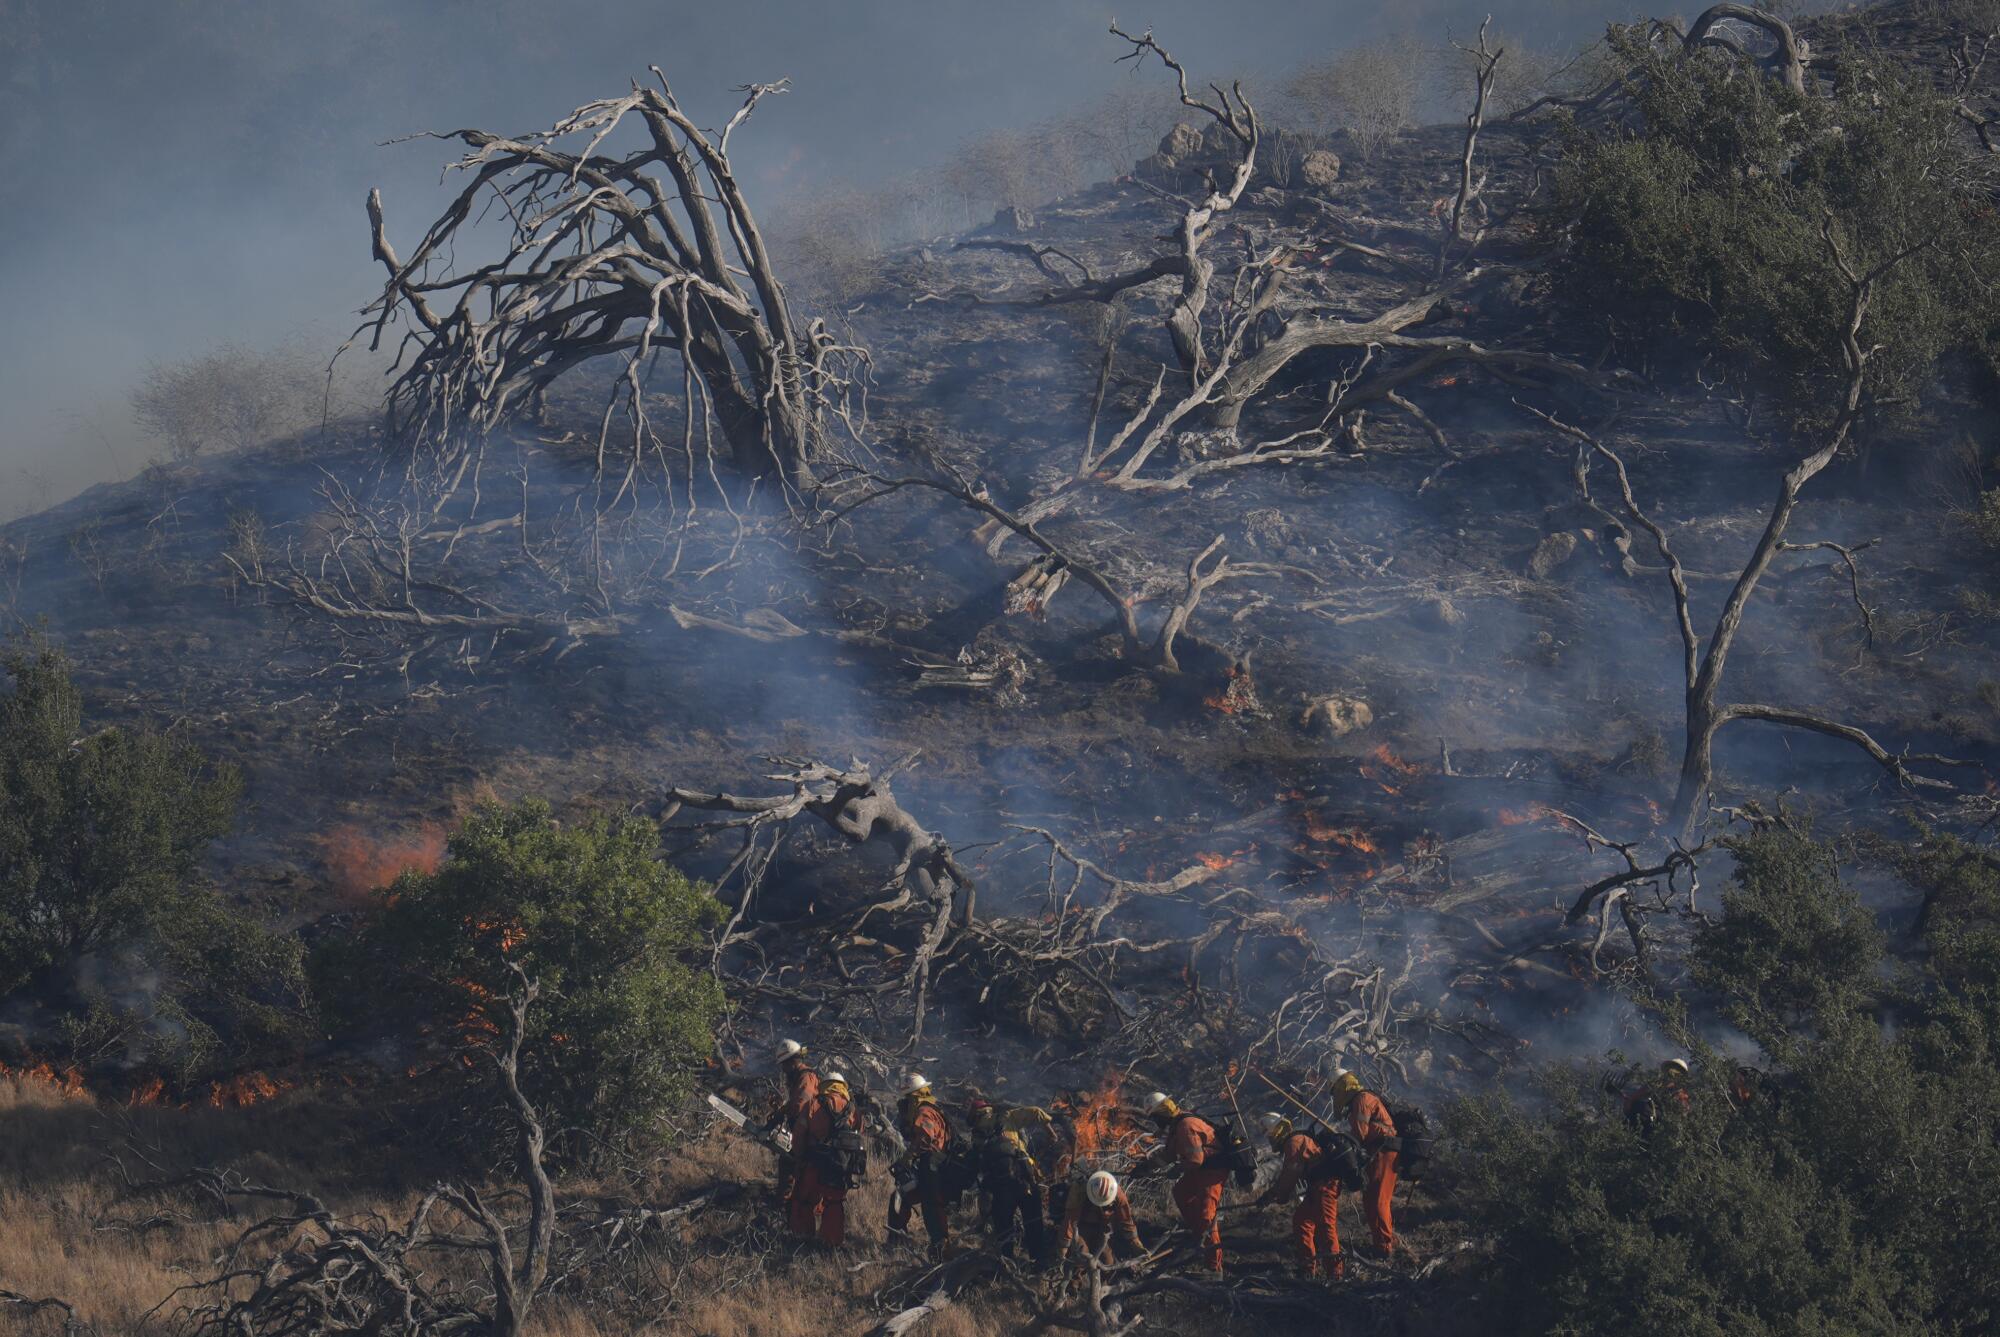 Firefighters work under a smoldering hillside left behind by the Post Fire 